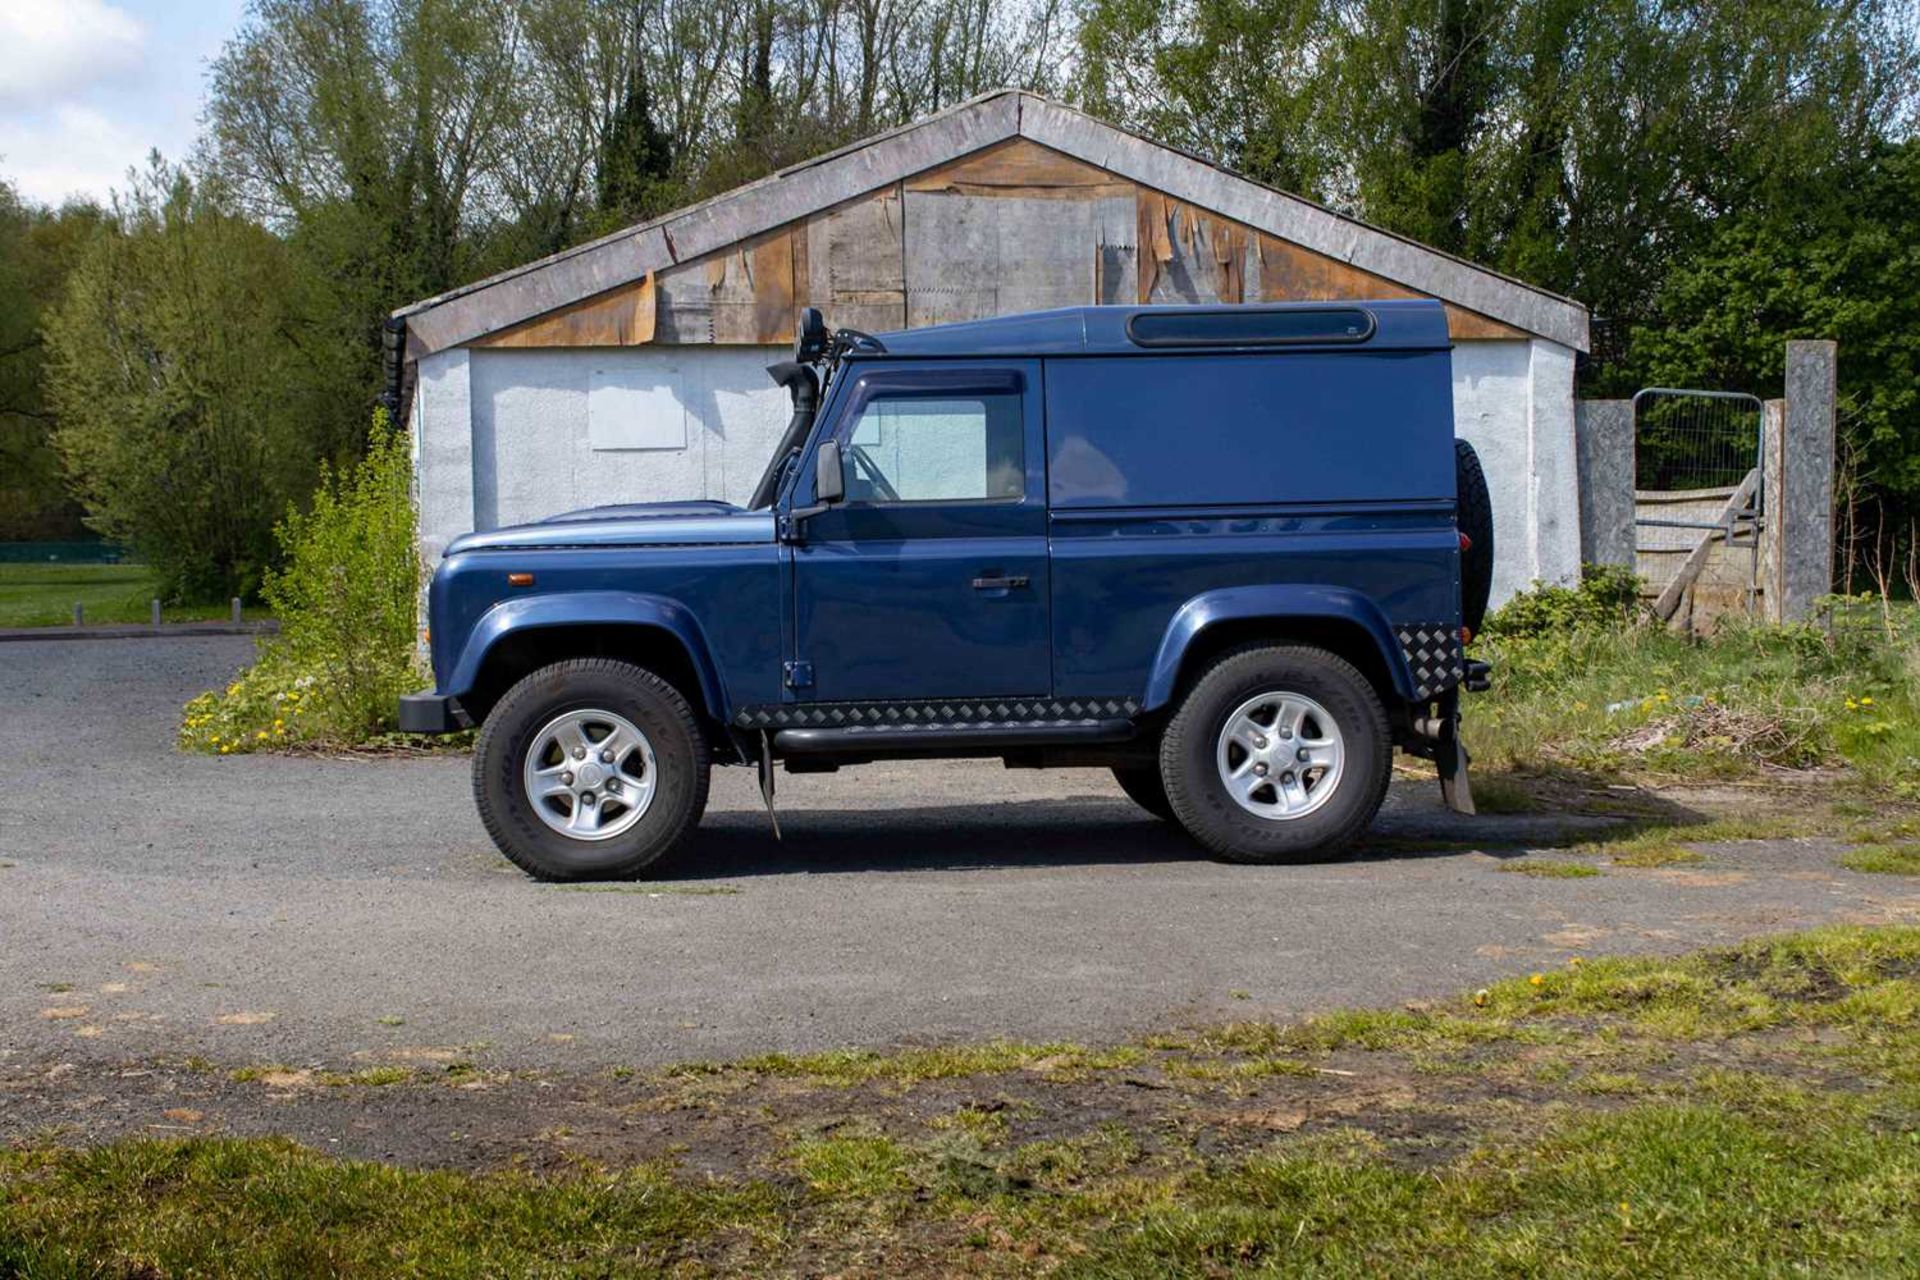 2007 Land Rover Defender 90 County  Powered by the 2.4-litre TDCi unit and features numerous tastefu - Image 6 of 76